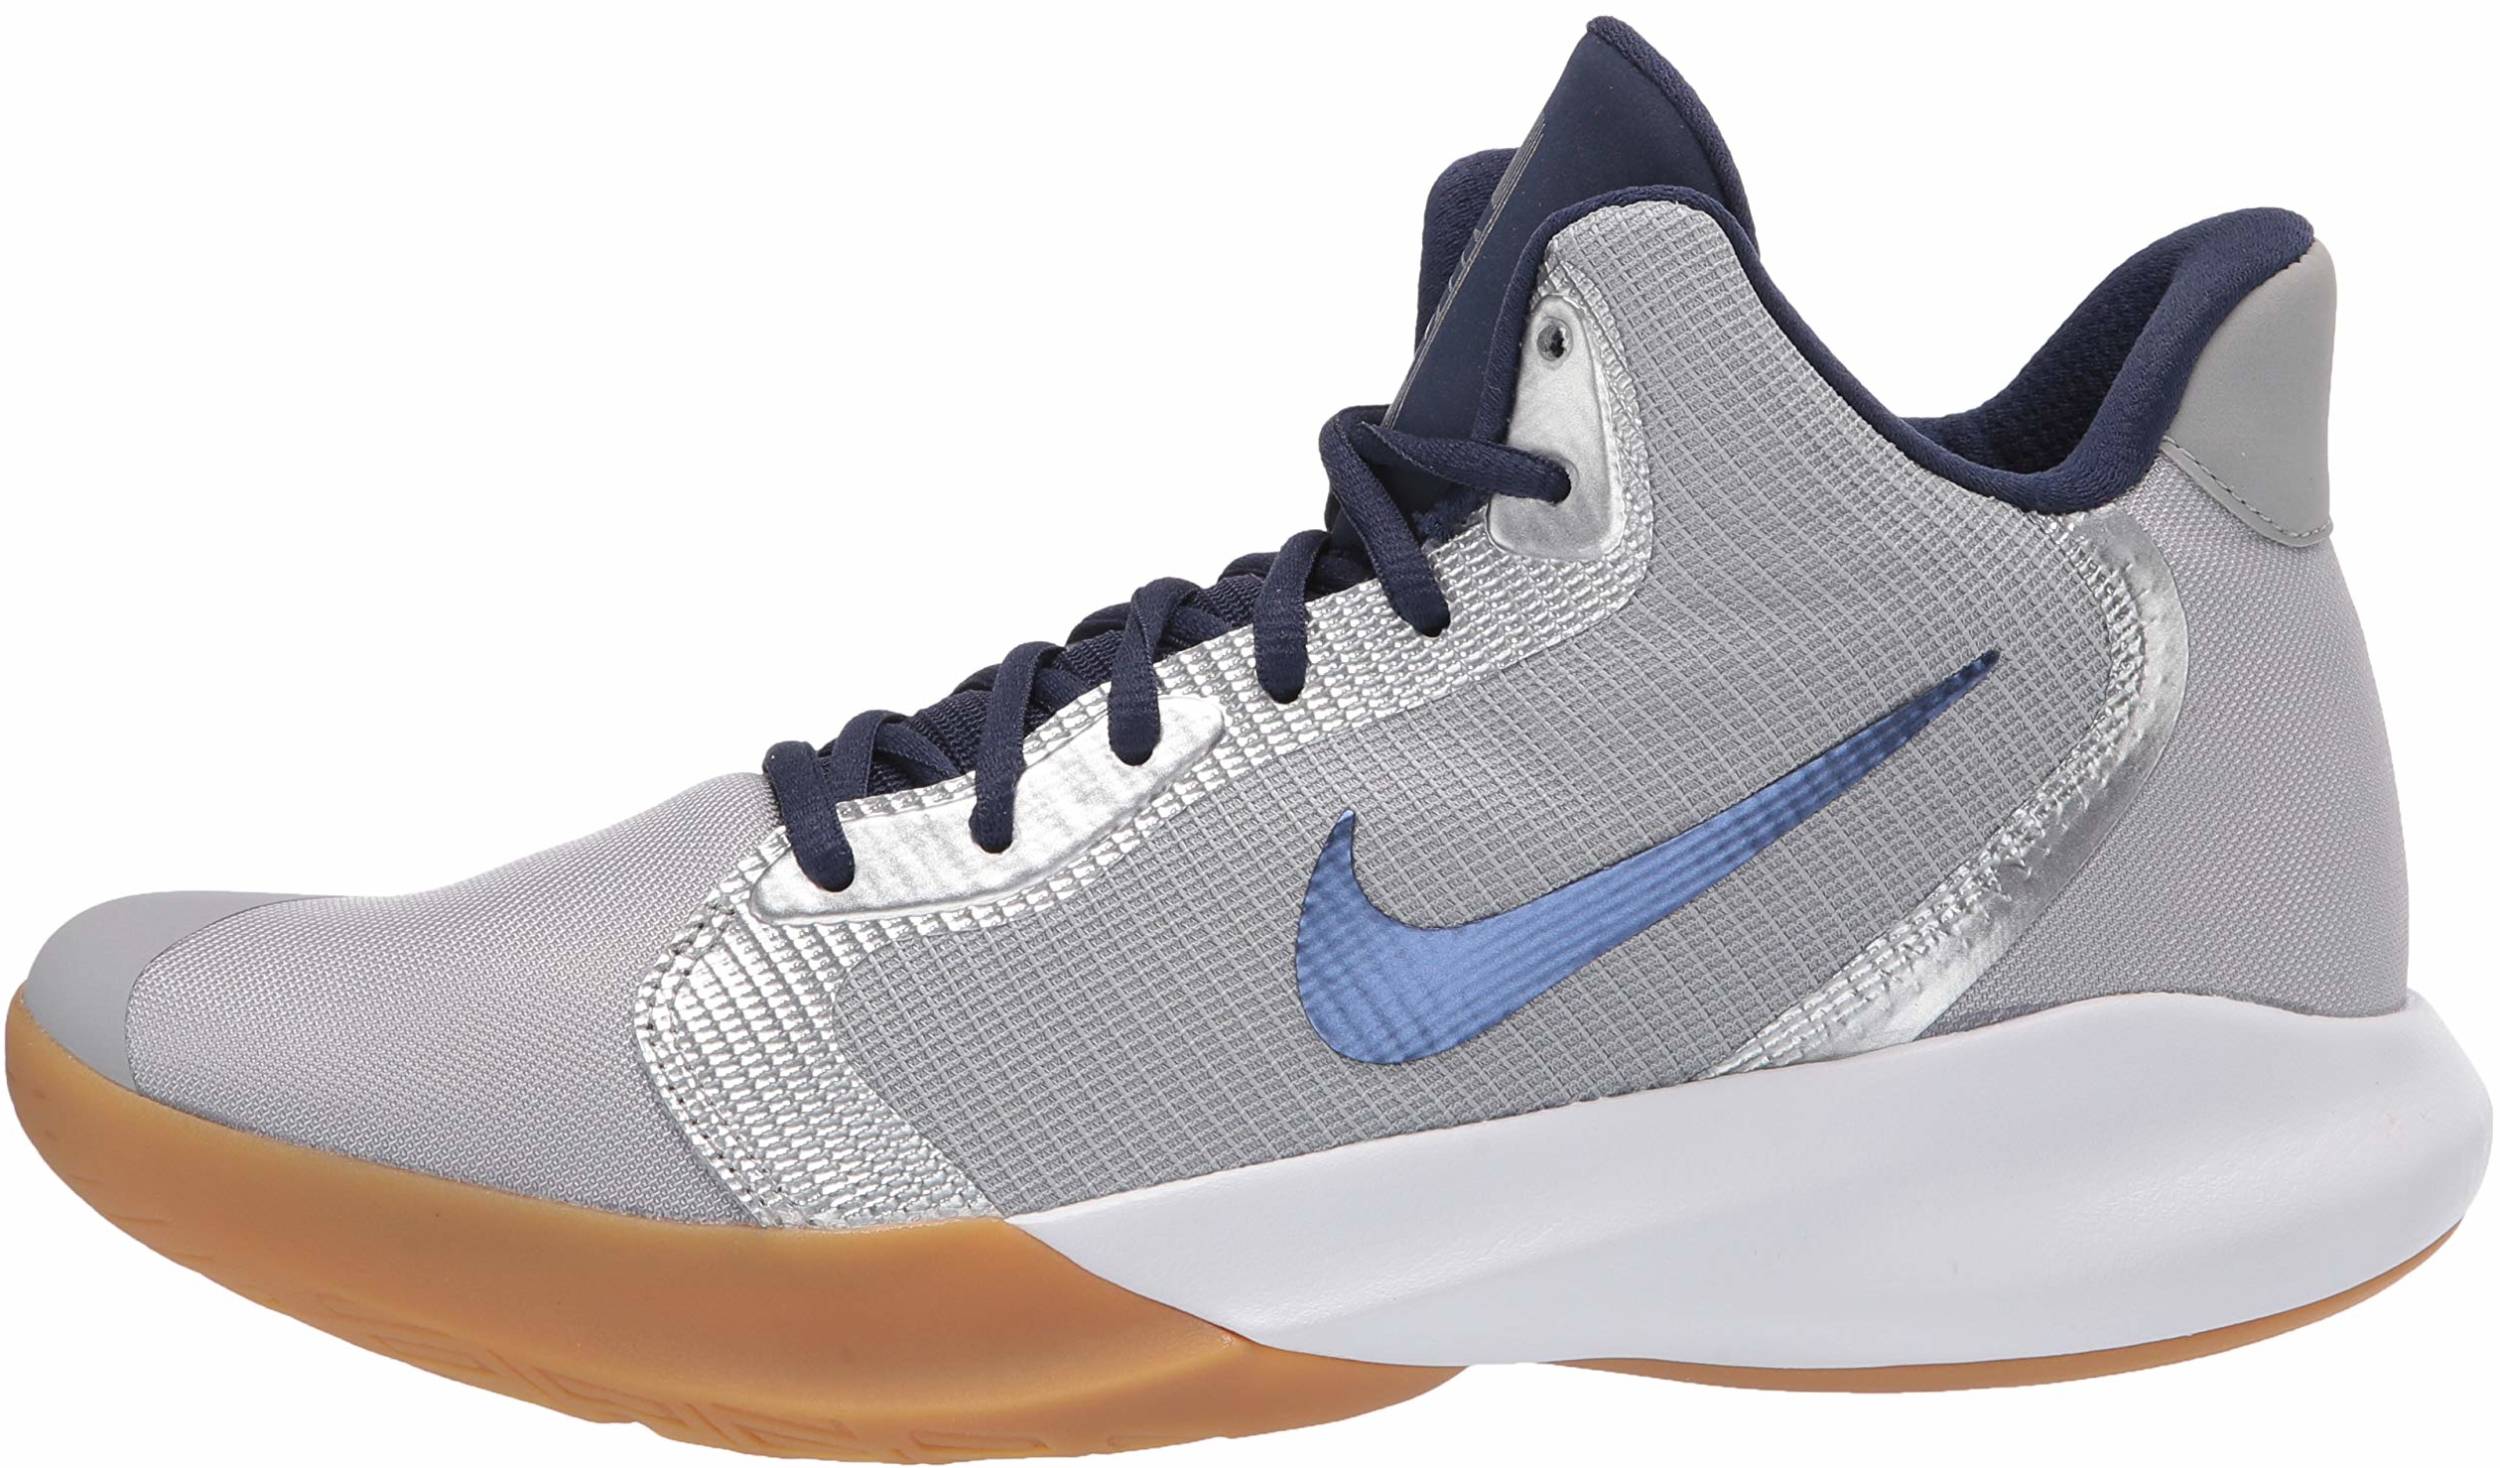 best basketball shoes under 75